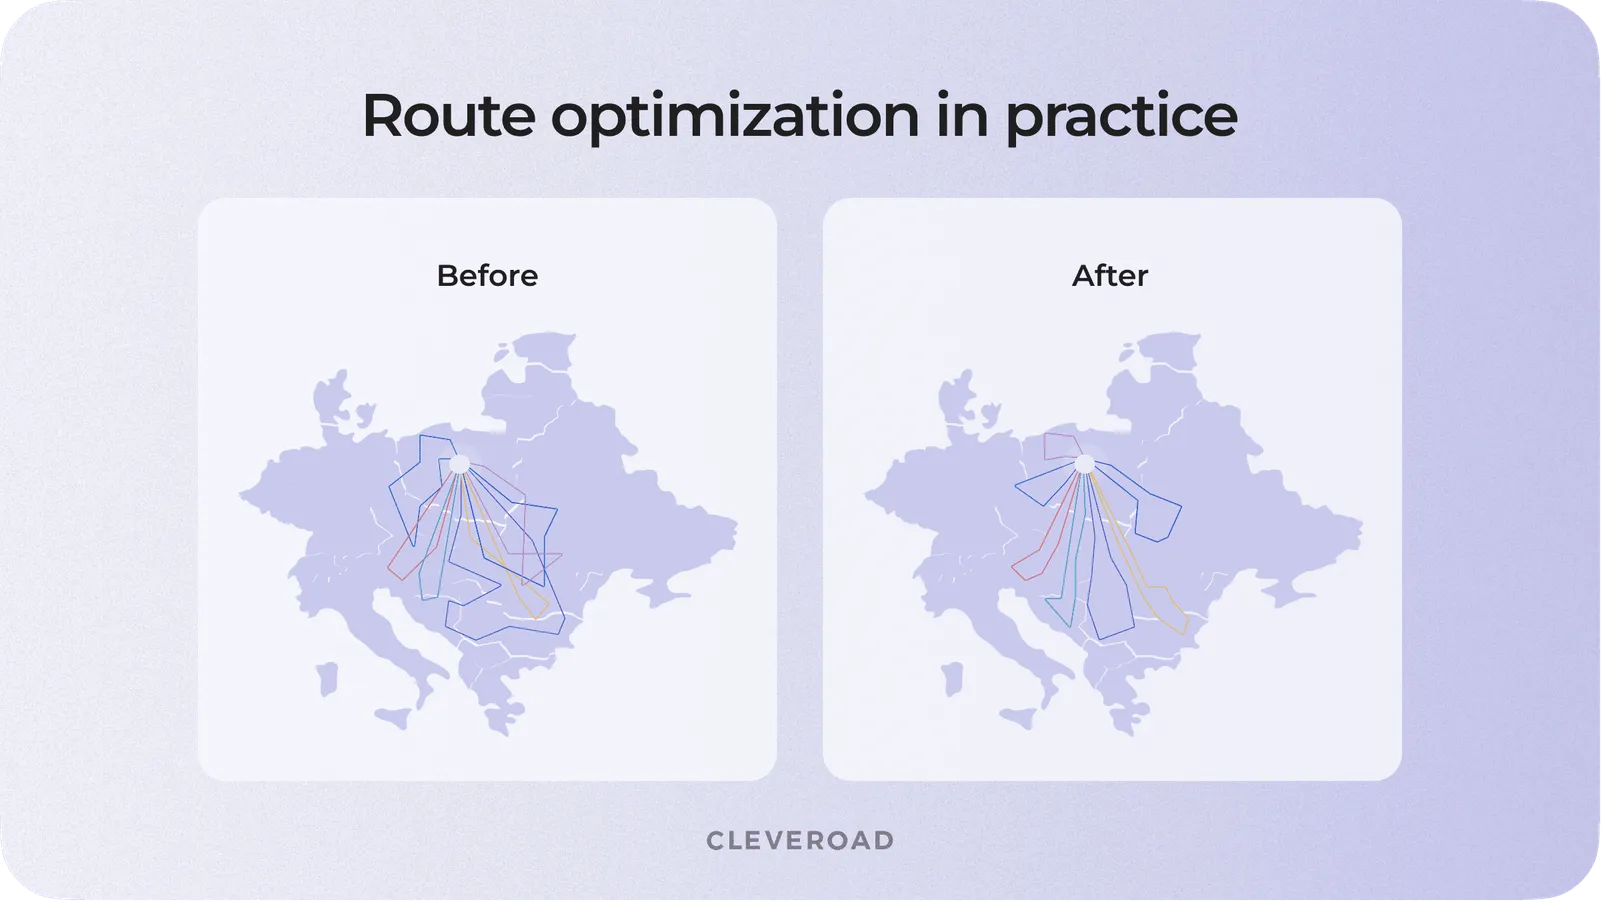 w does route optimization operates in practice